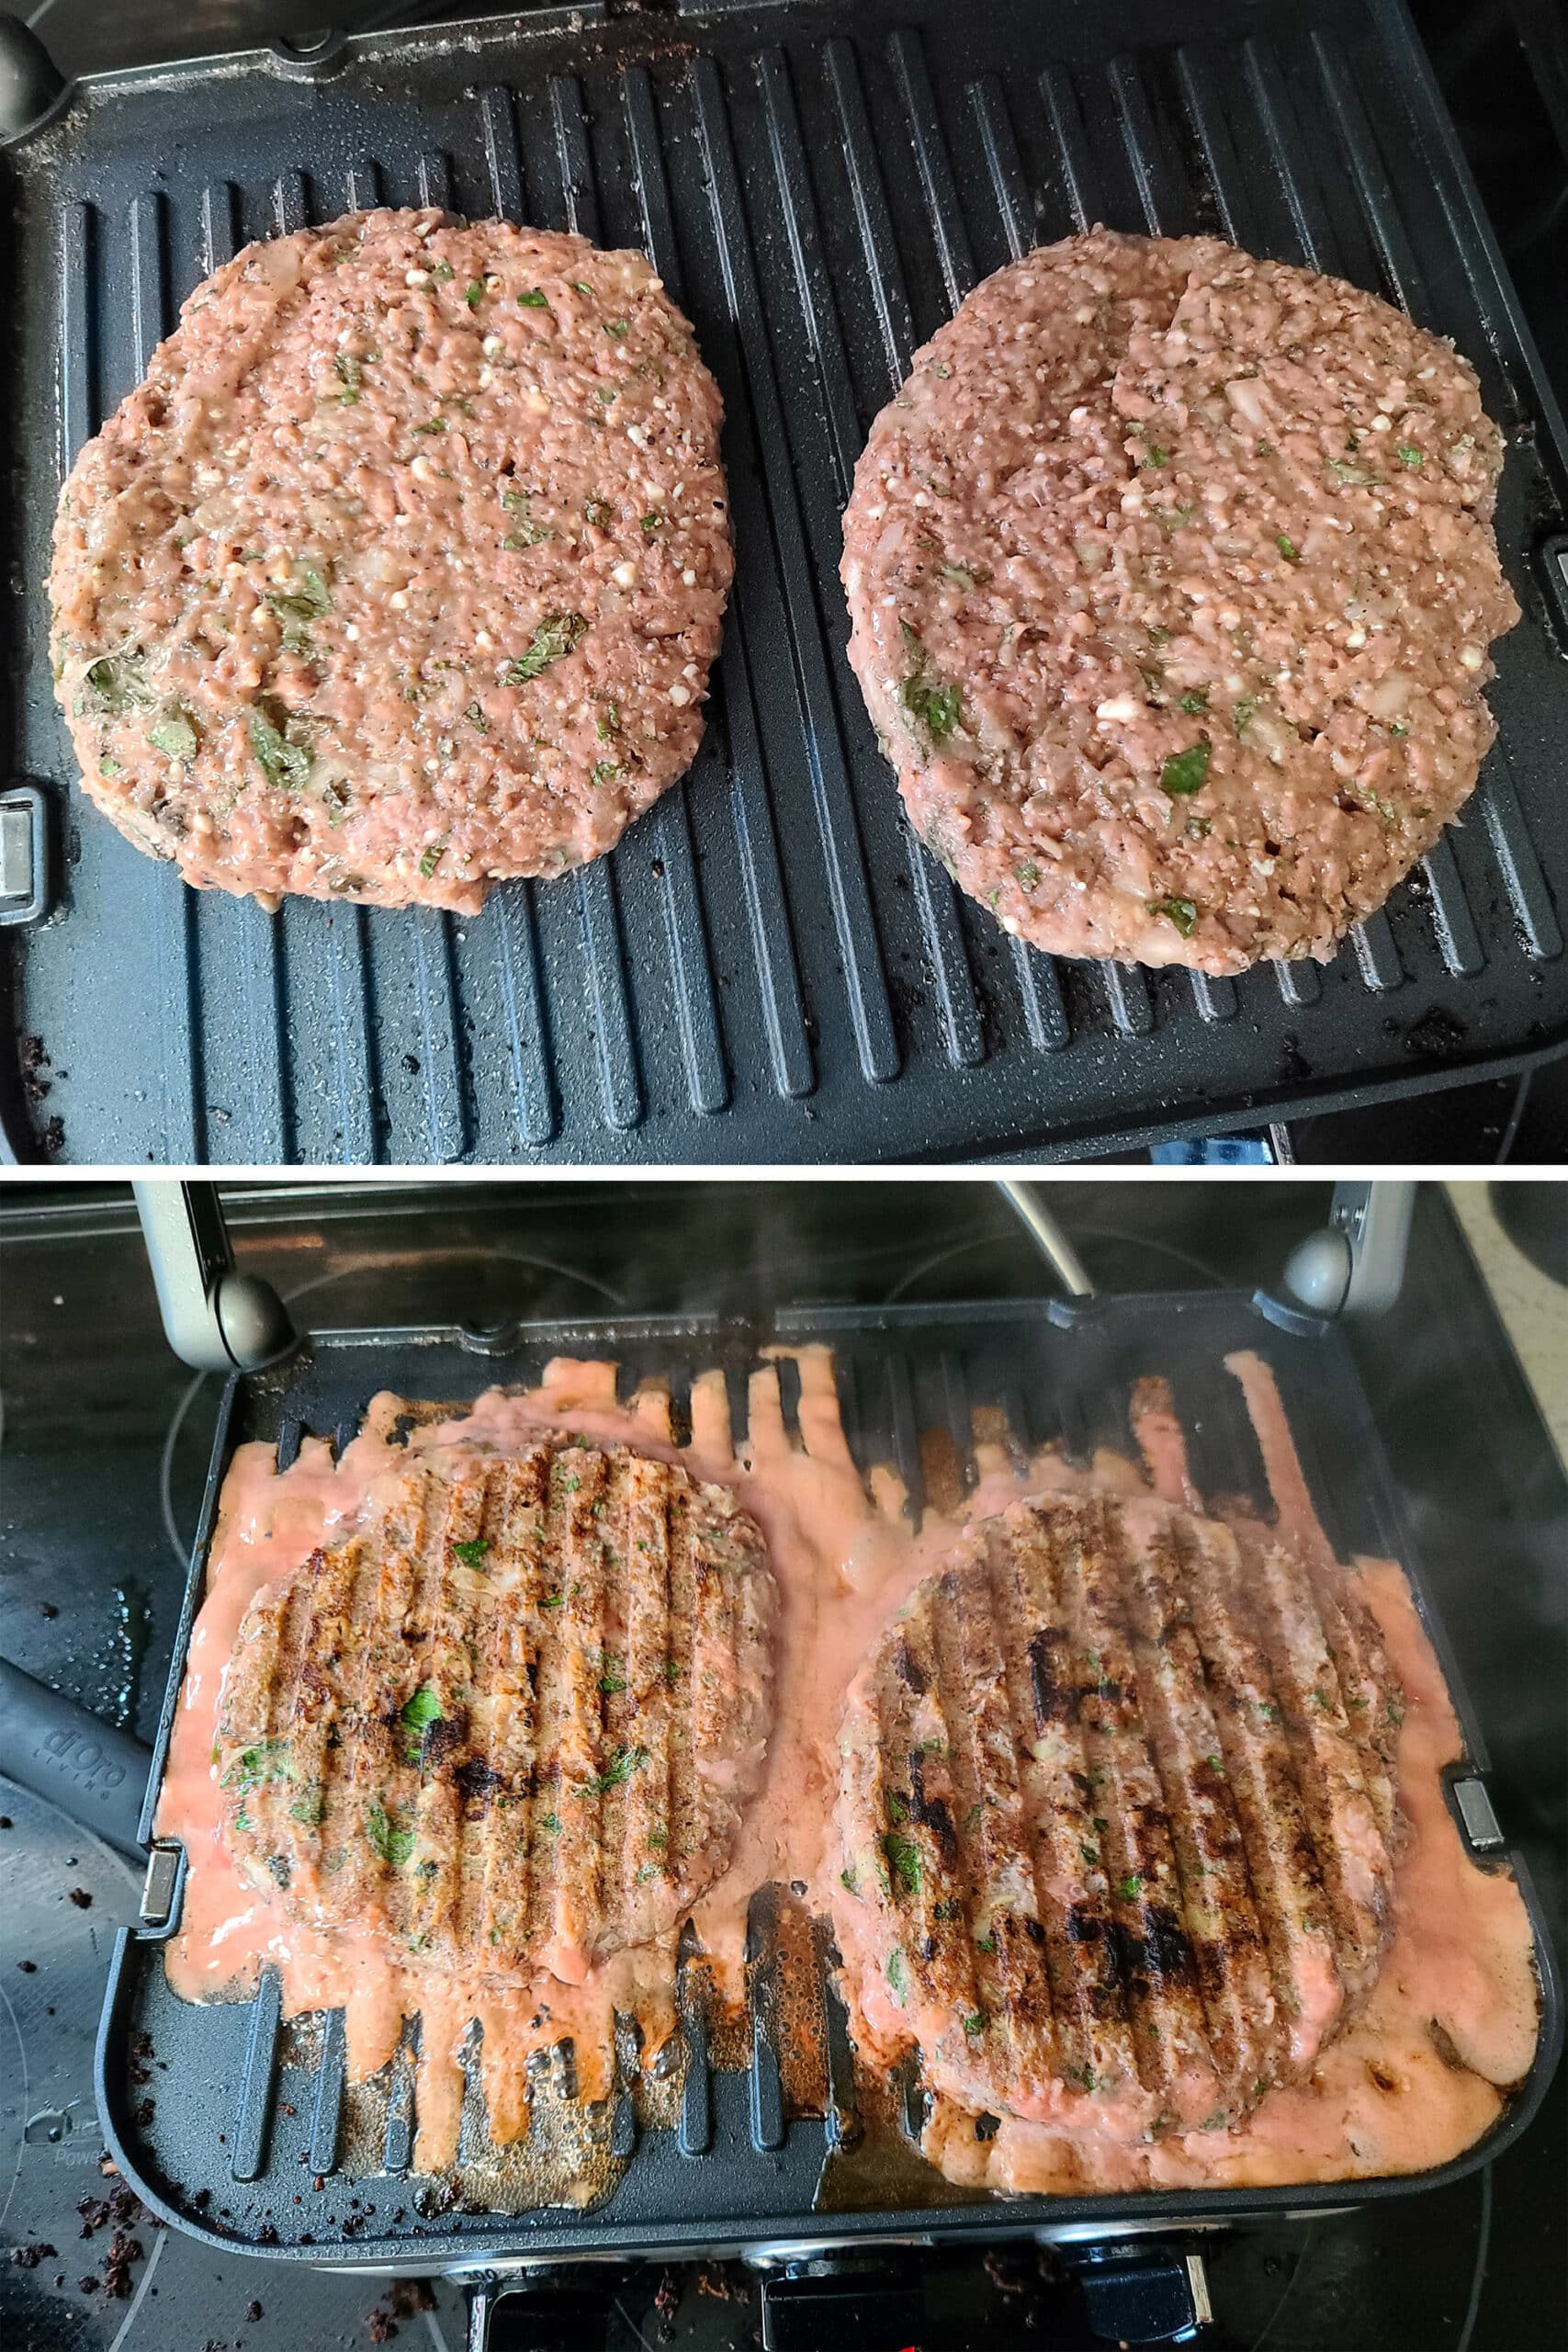 A 2 part image showing the spiced beyond burgers cooking on an indoor grill.